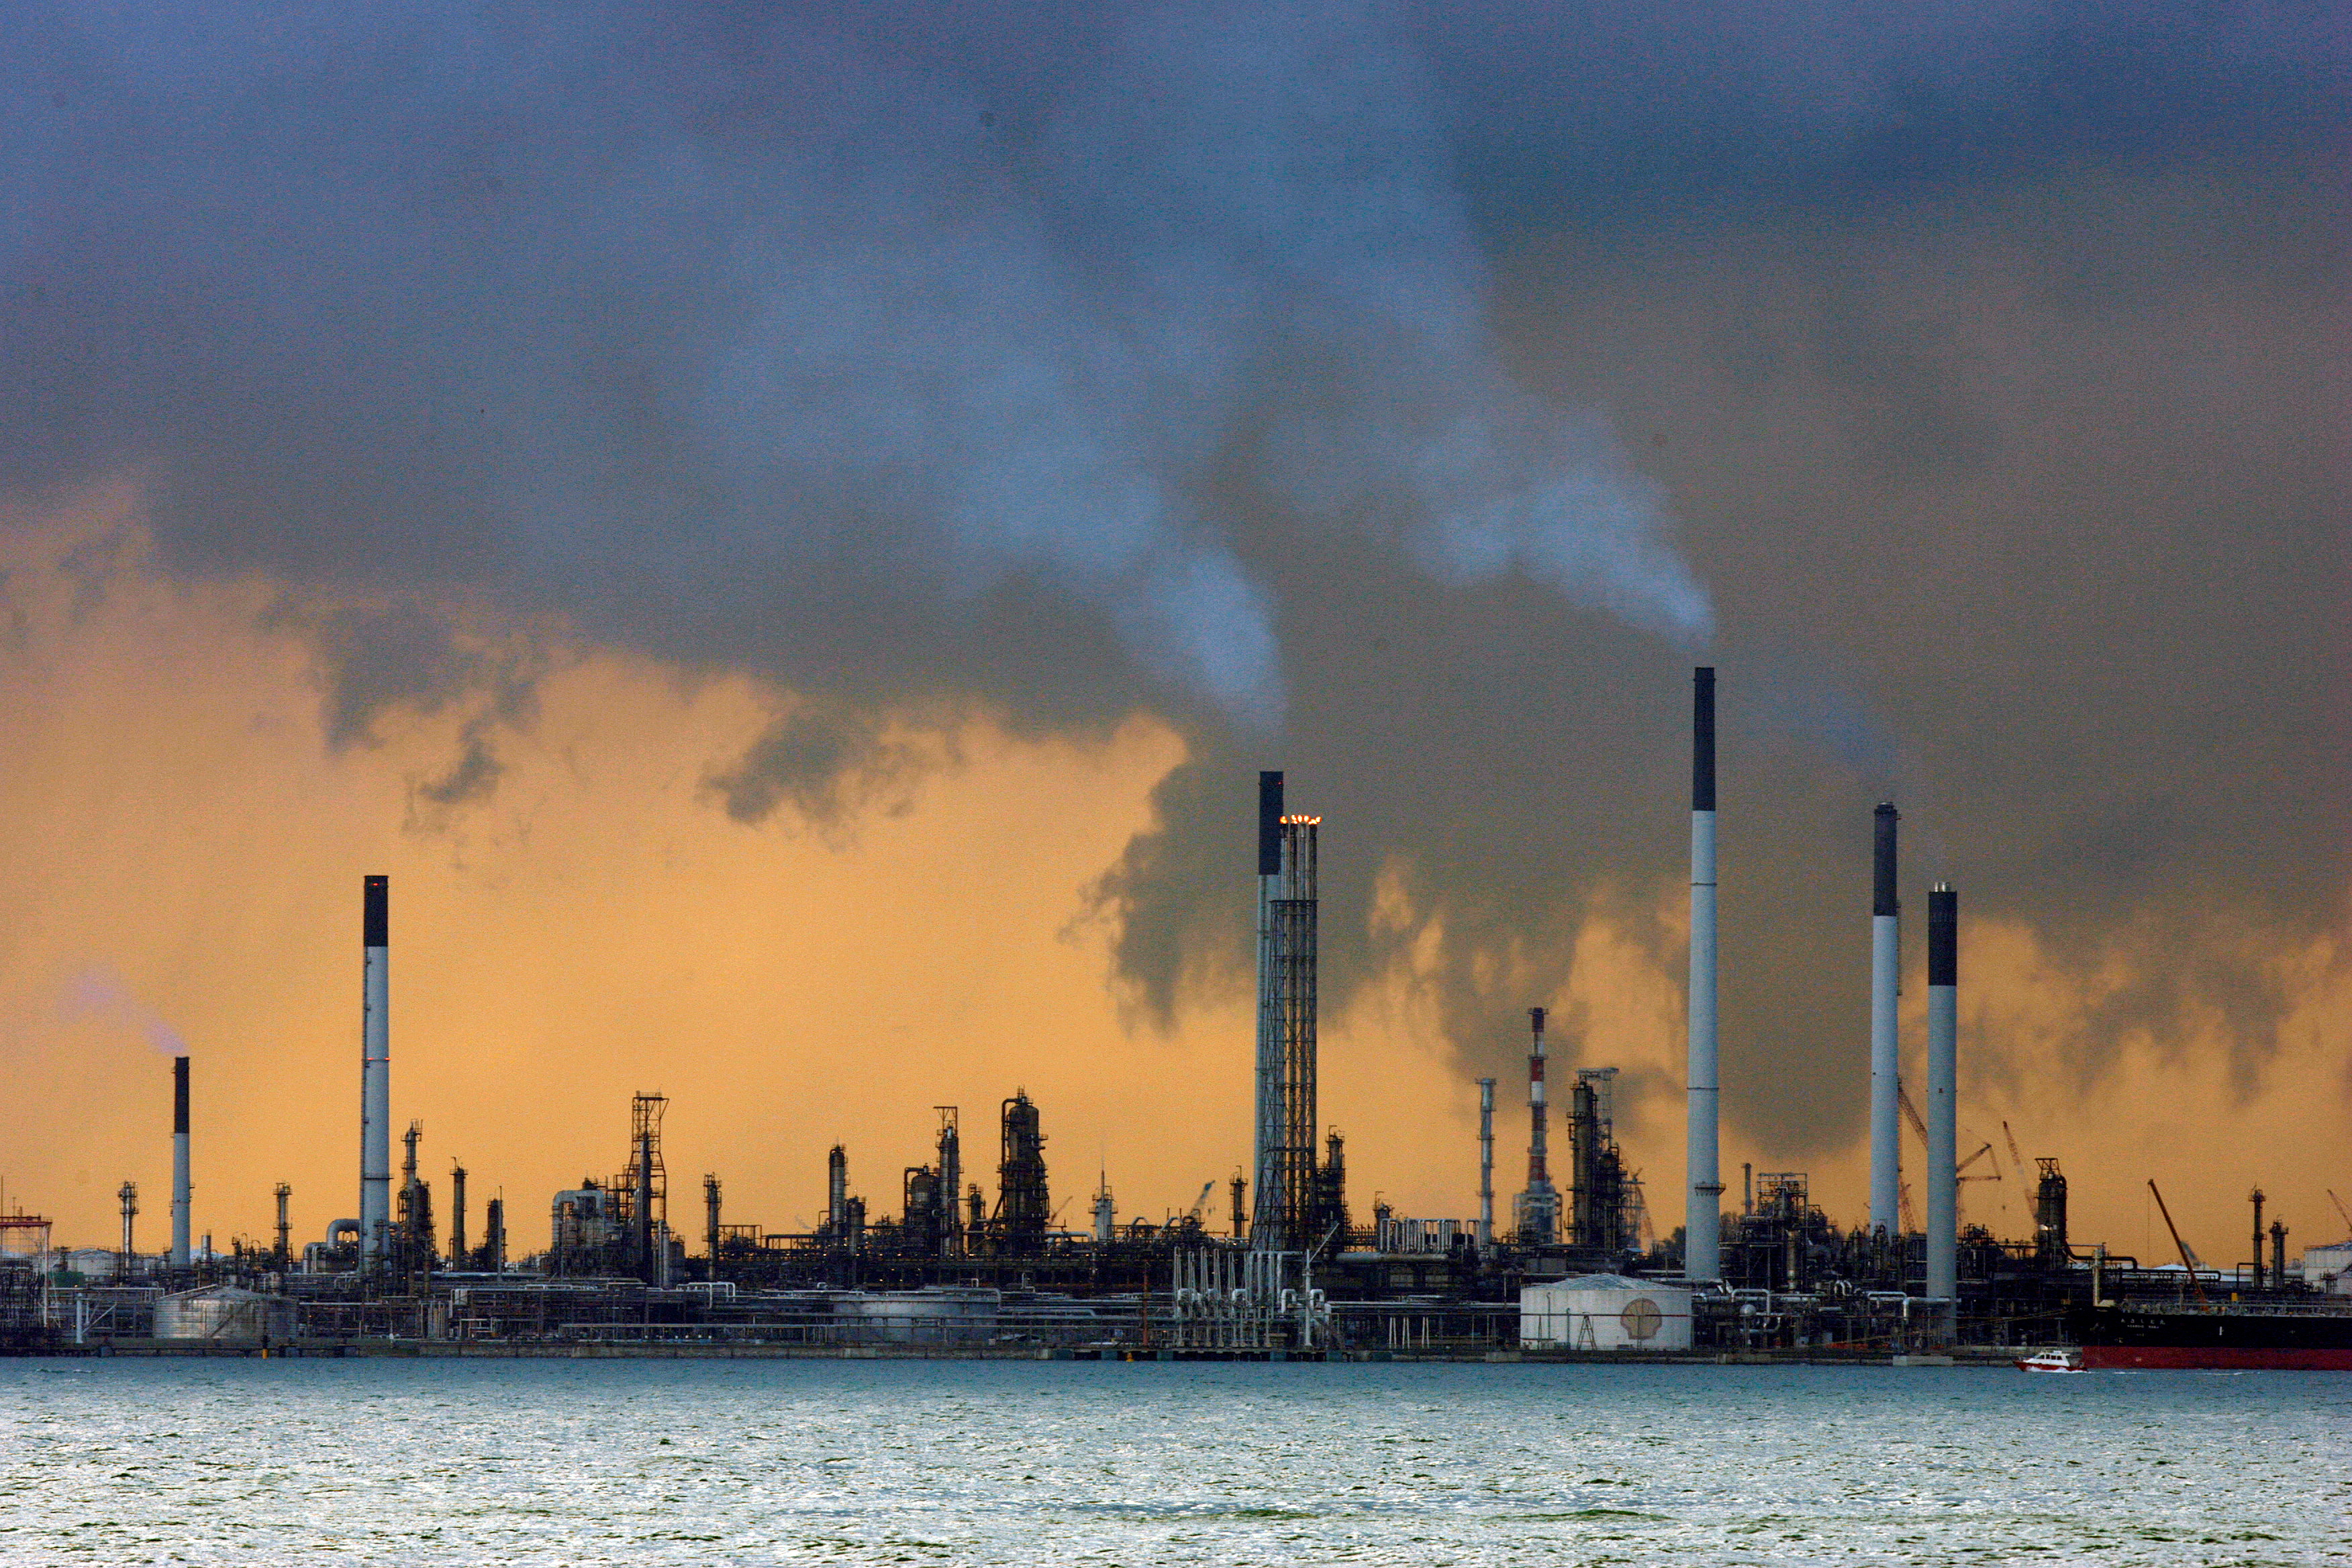 A view of an oil refinery off the coast of Singapore